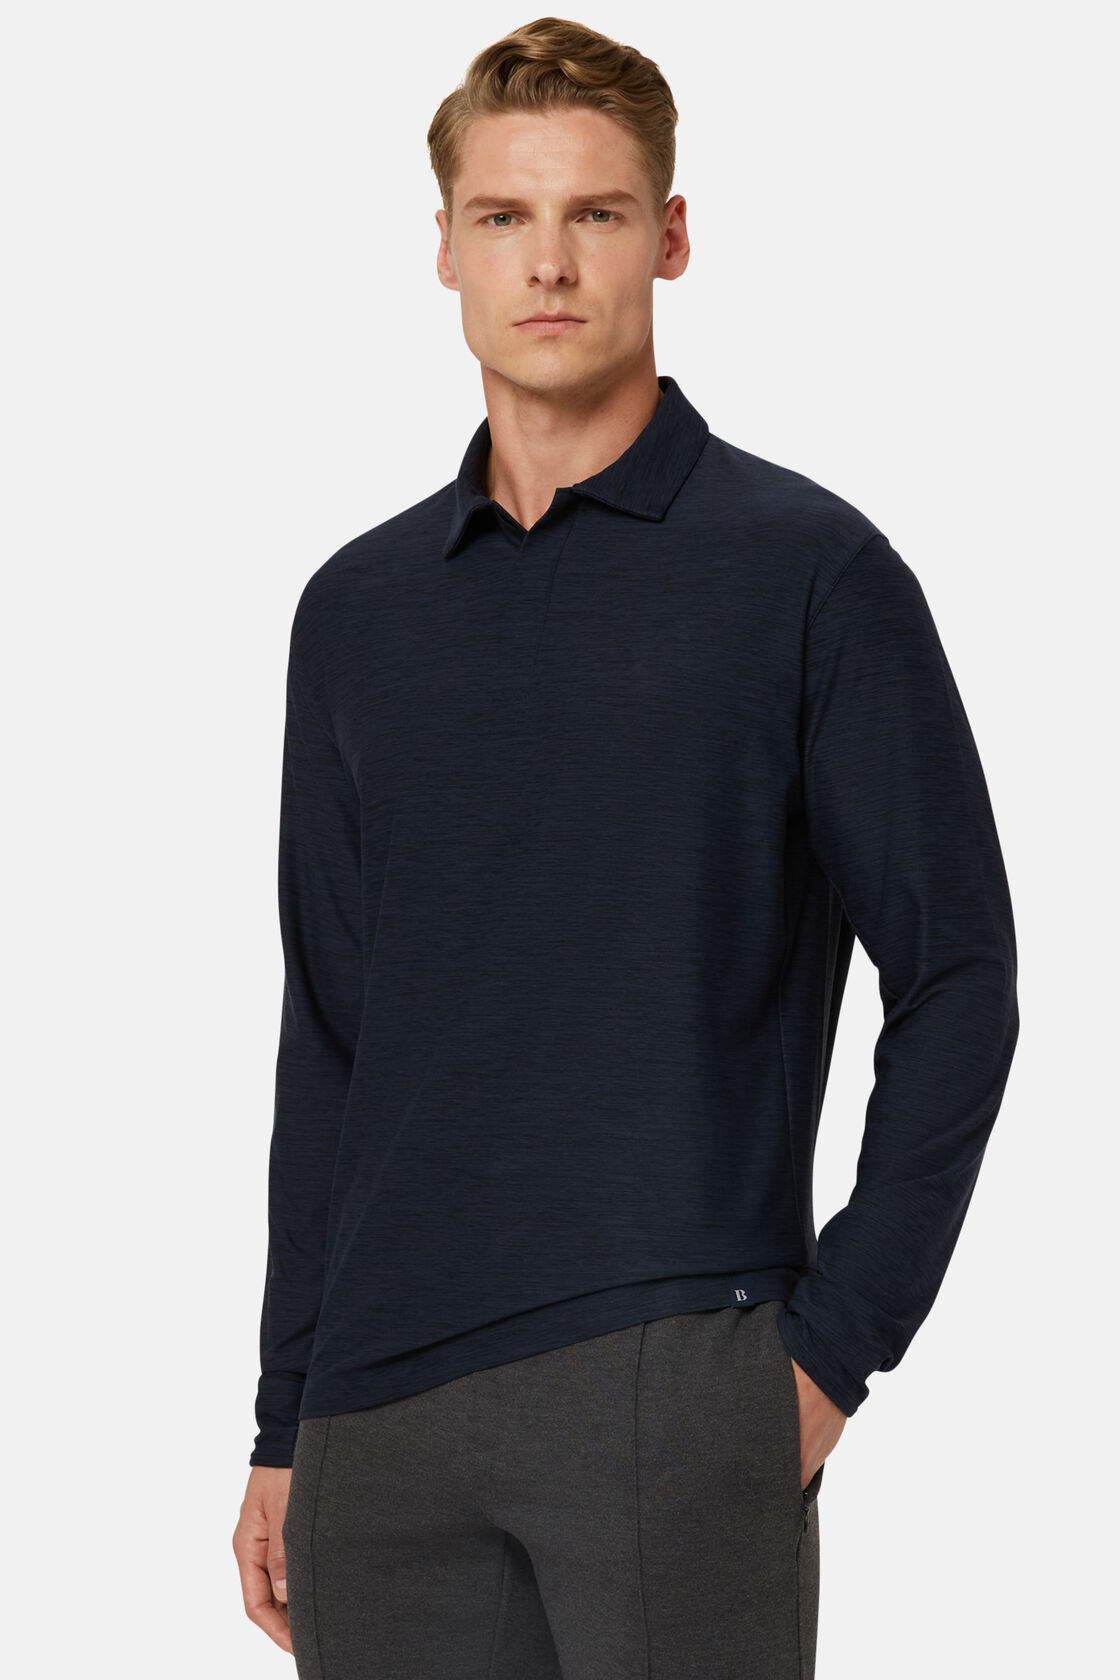 Regular Fit Long-Sleeved Technical Fabric Polo Shirt, Navy blue, hi-res